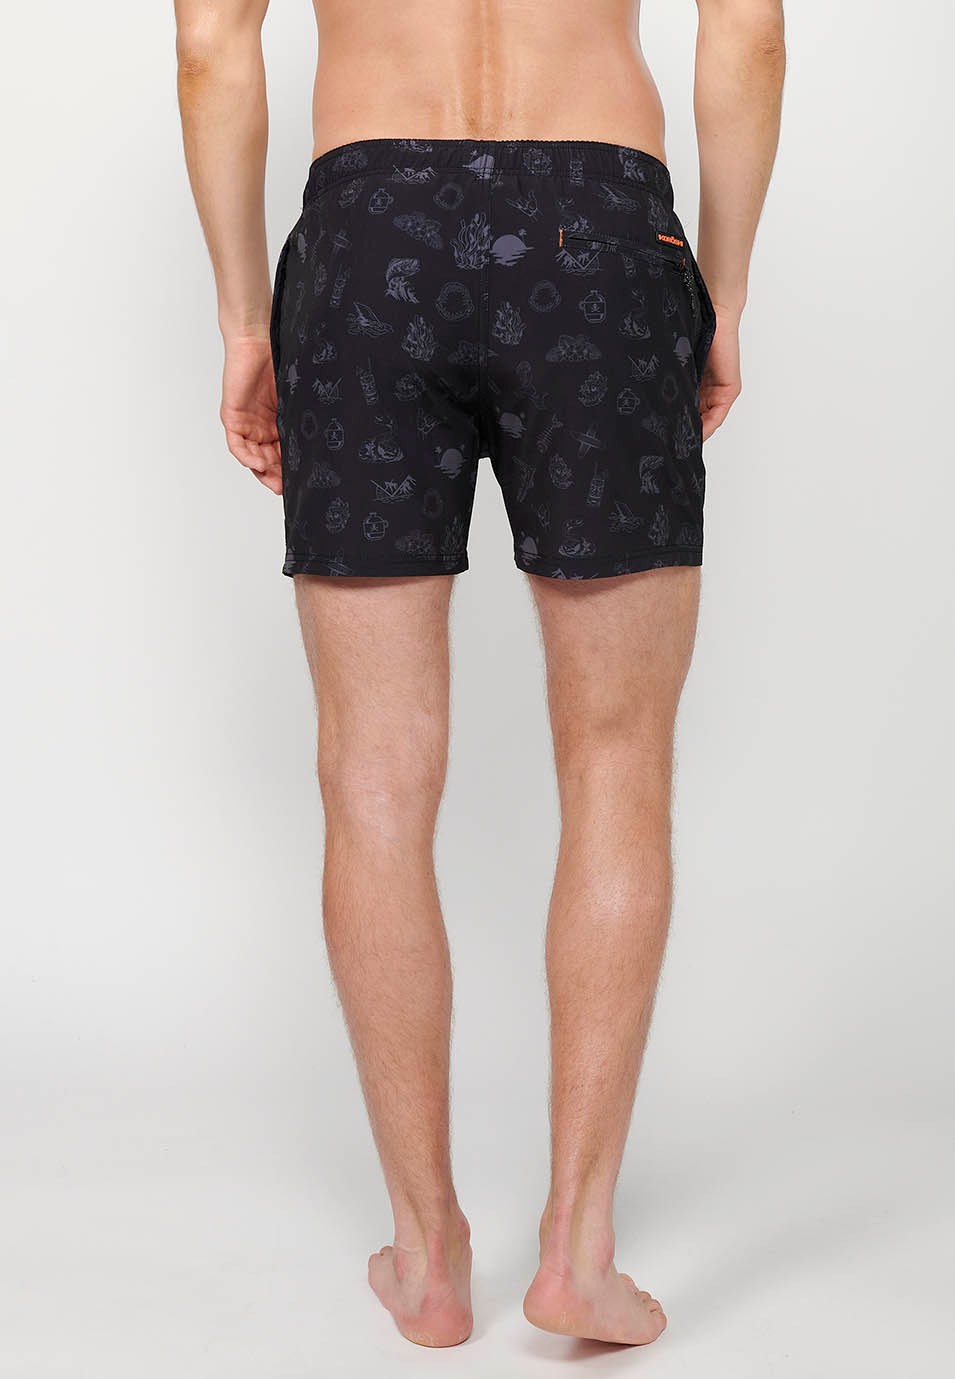 Printed short swimsuit with adjustable waist with drawstring and back pocket and an inner gray color for men 6